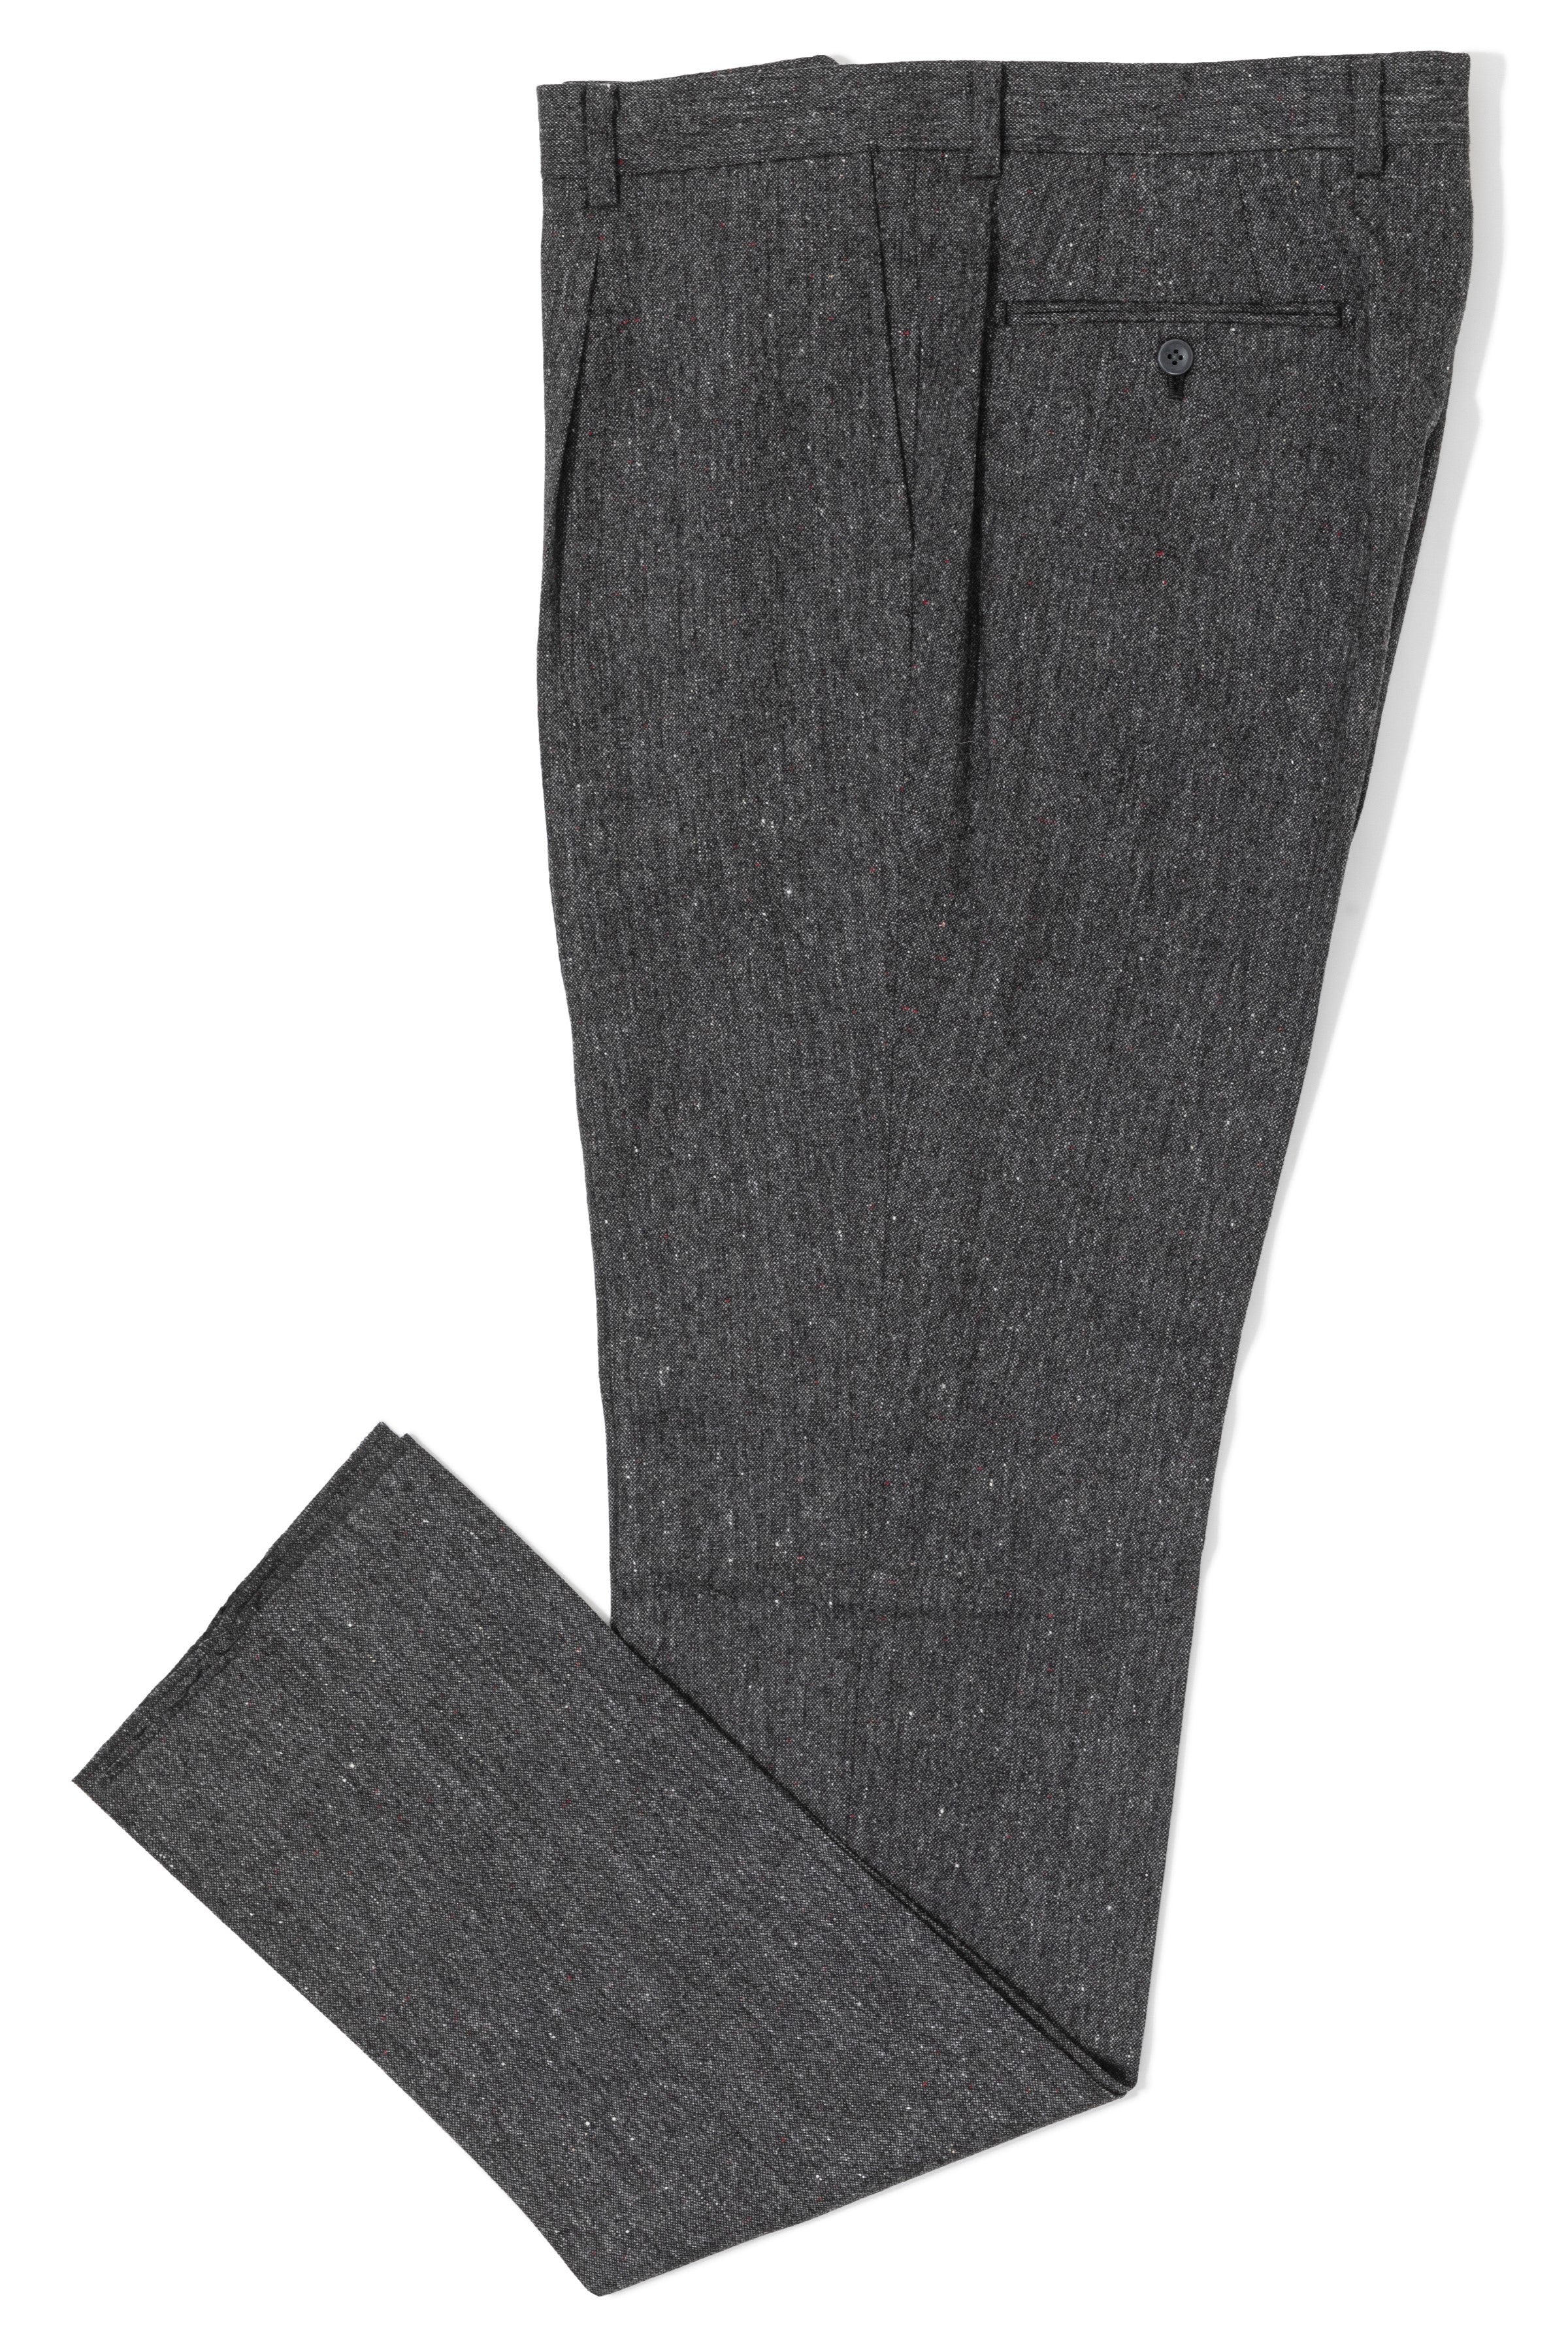 The Armoury by Ring Jacket Model B Dark Grey Wool Donegal Trousers